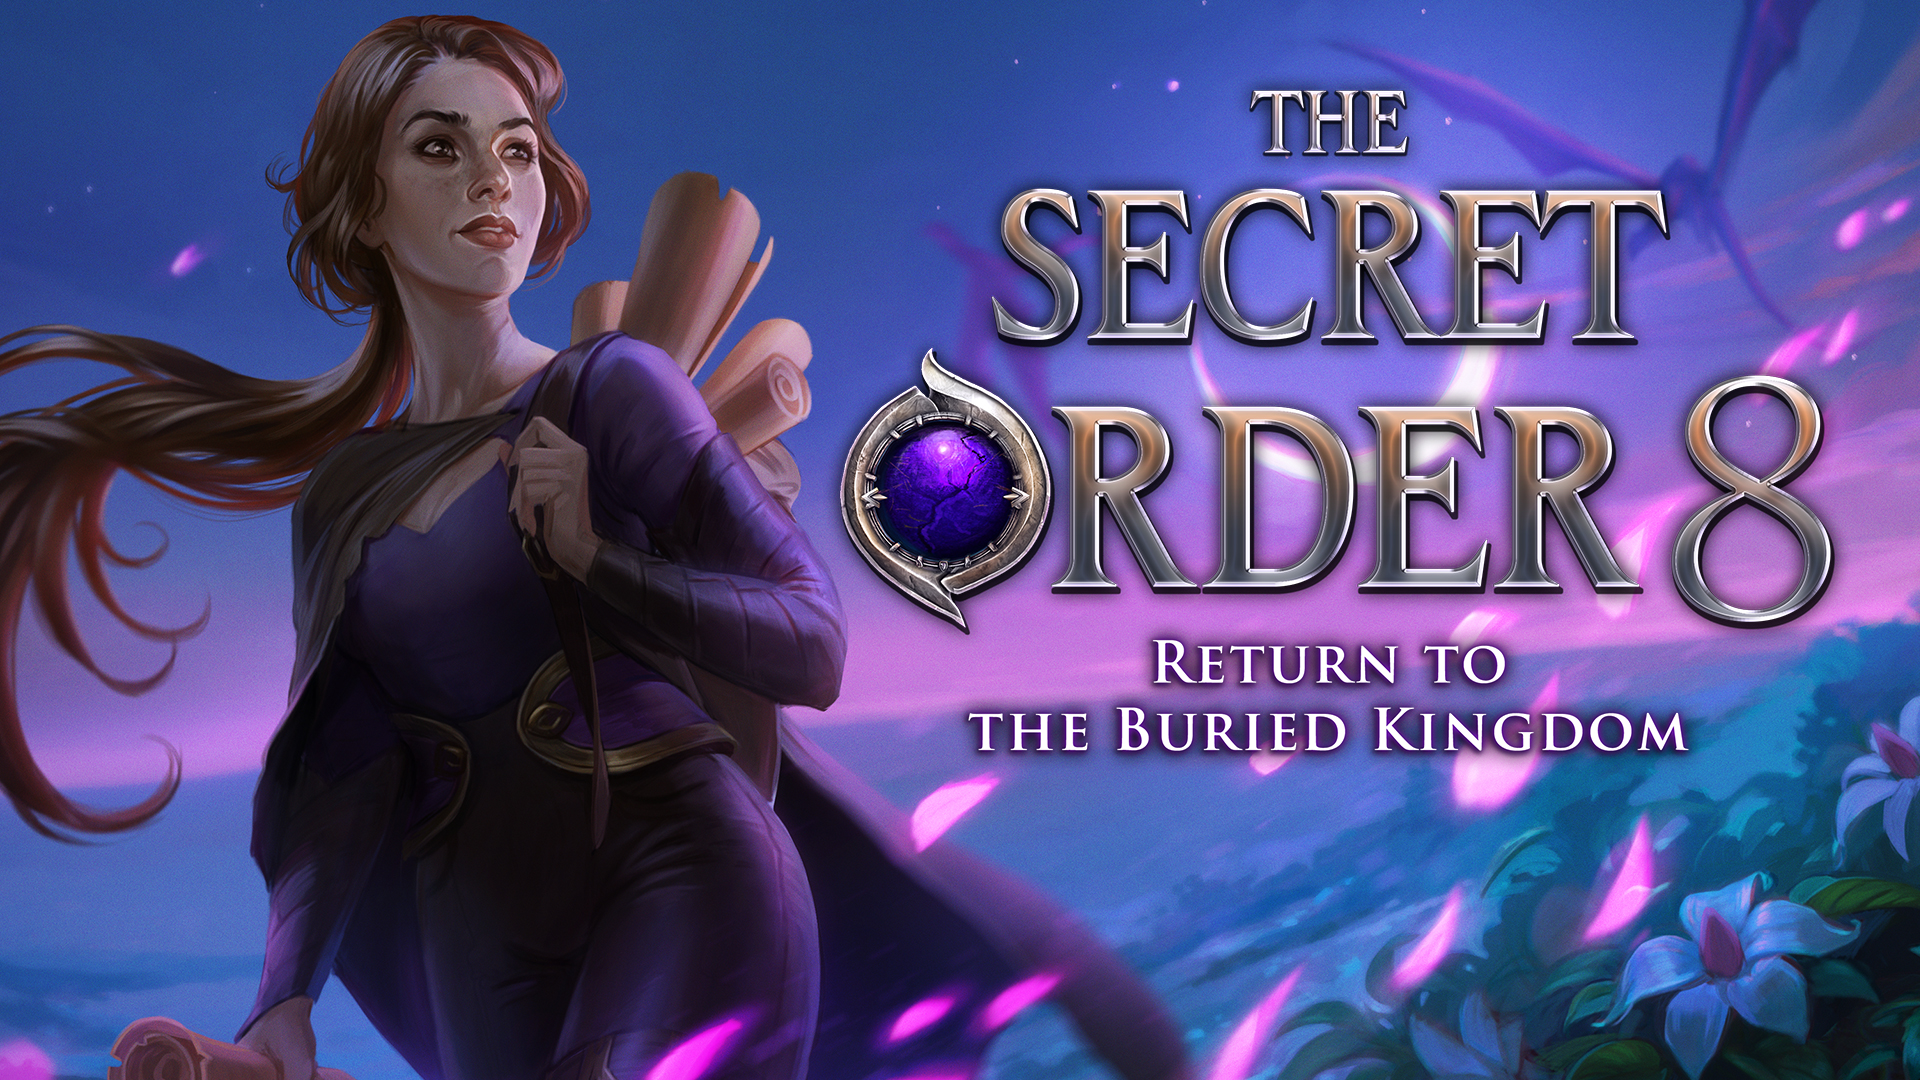 The Secret Order 8: Return to the Buried Kingdom download the last version for ipod